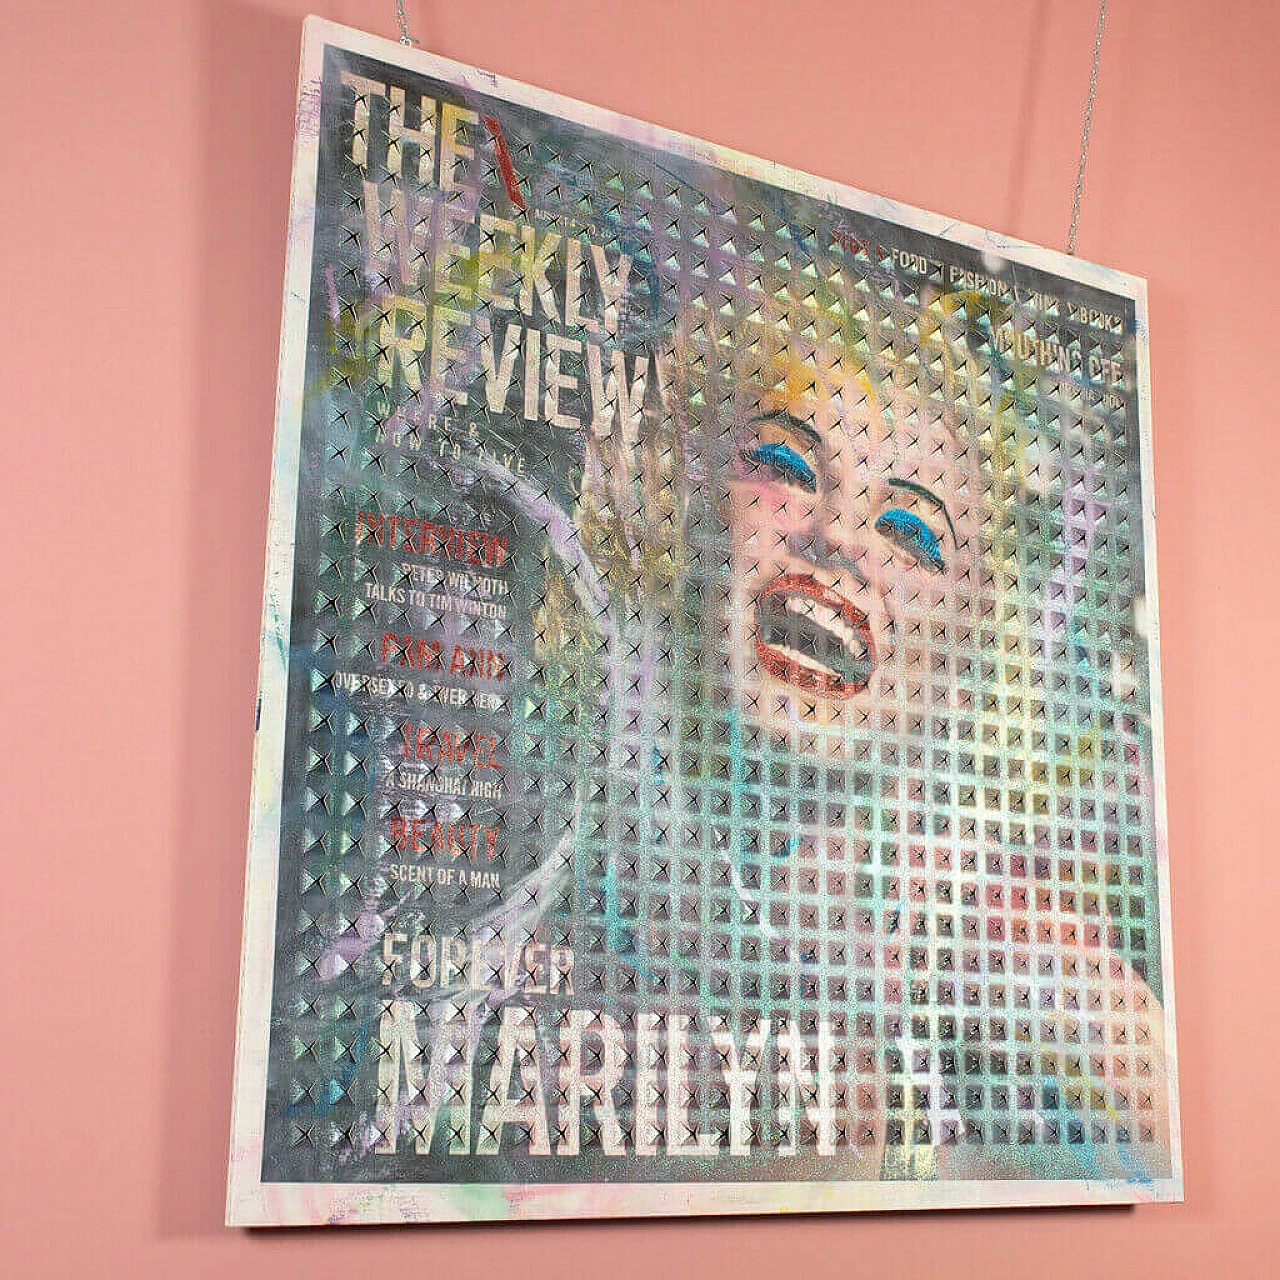 Painting The weekly review depicting Marilyn Monroe, 90s 1184891